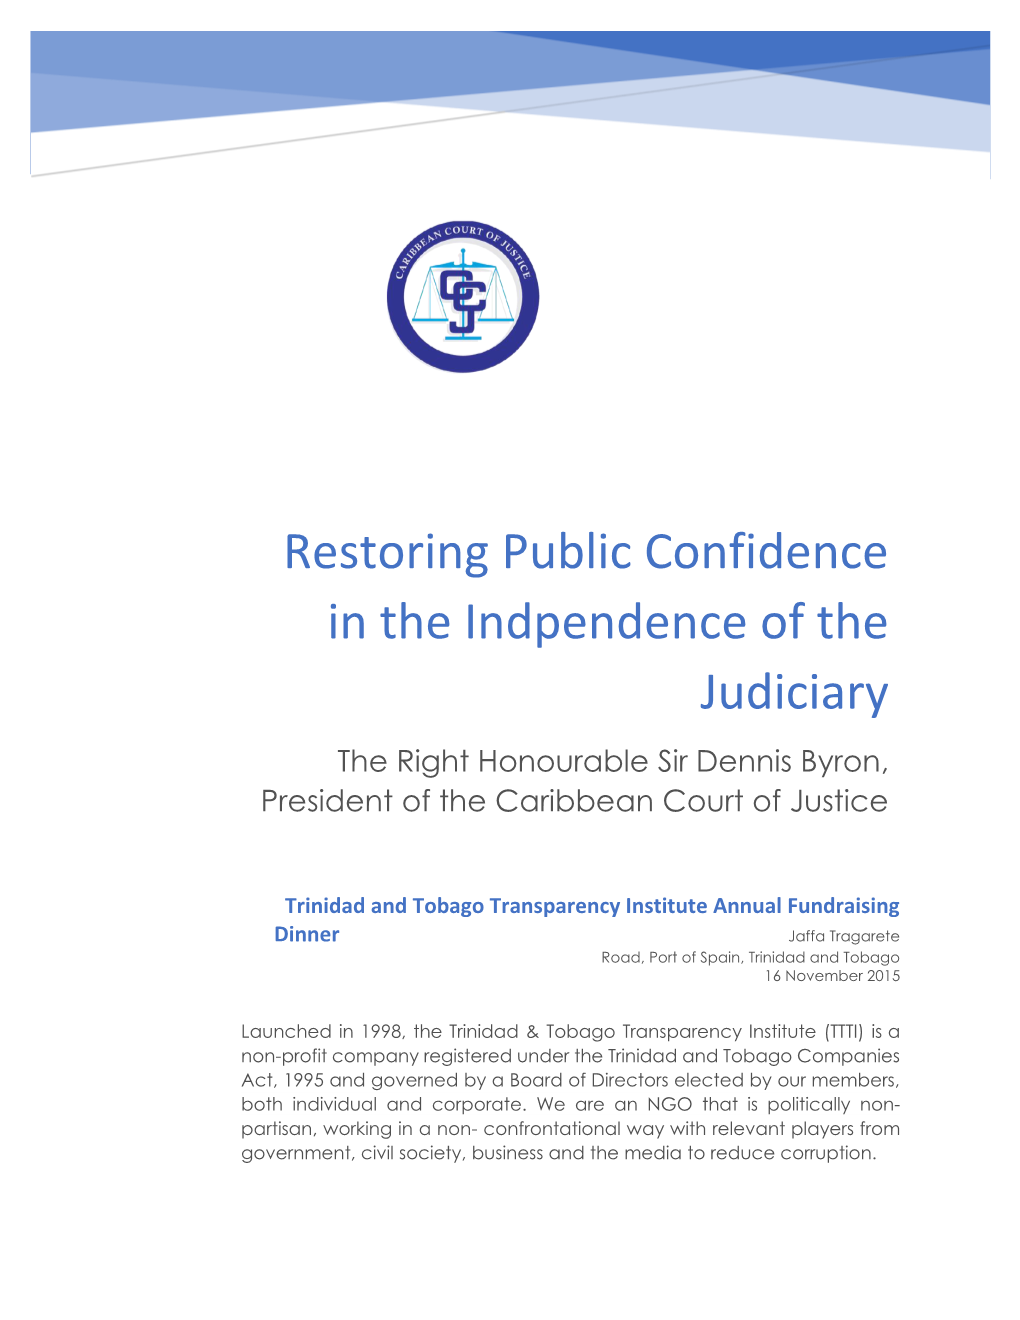 Restoring Public Confidence in the Independence of the Judiciary